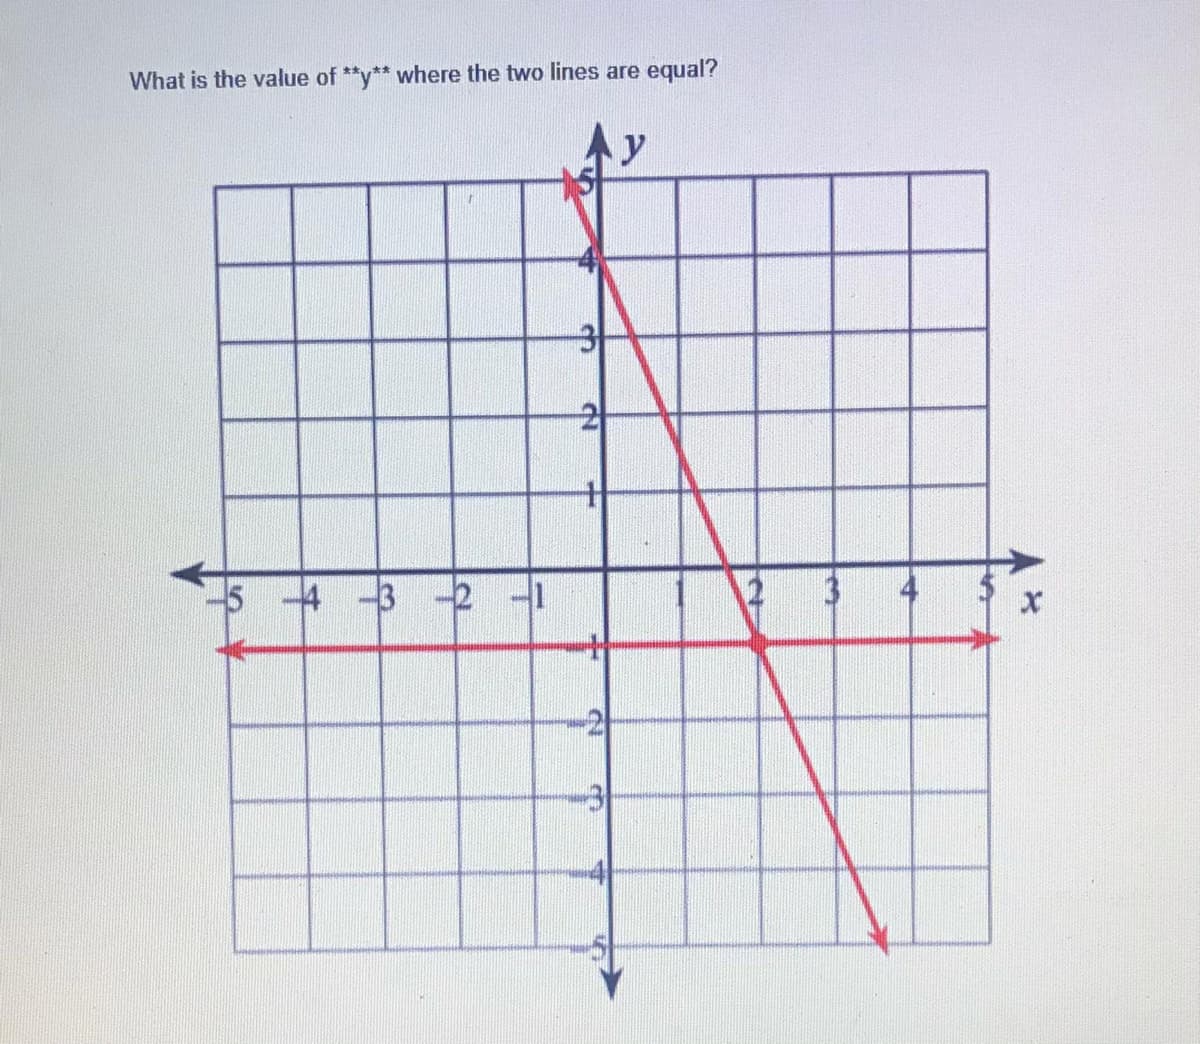 What is the value of **y** where the two lines are equal?
y
